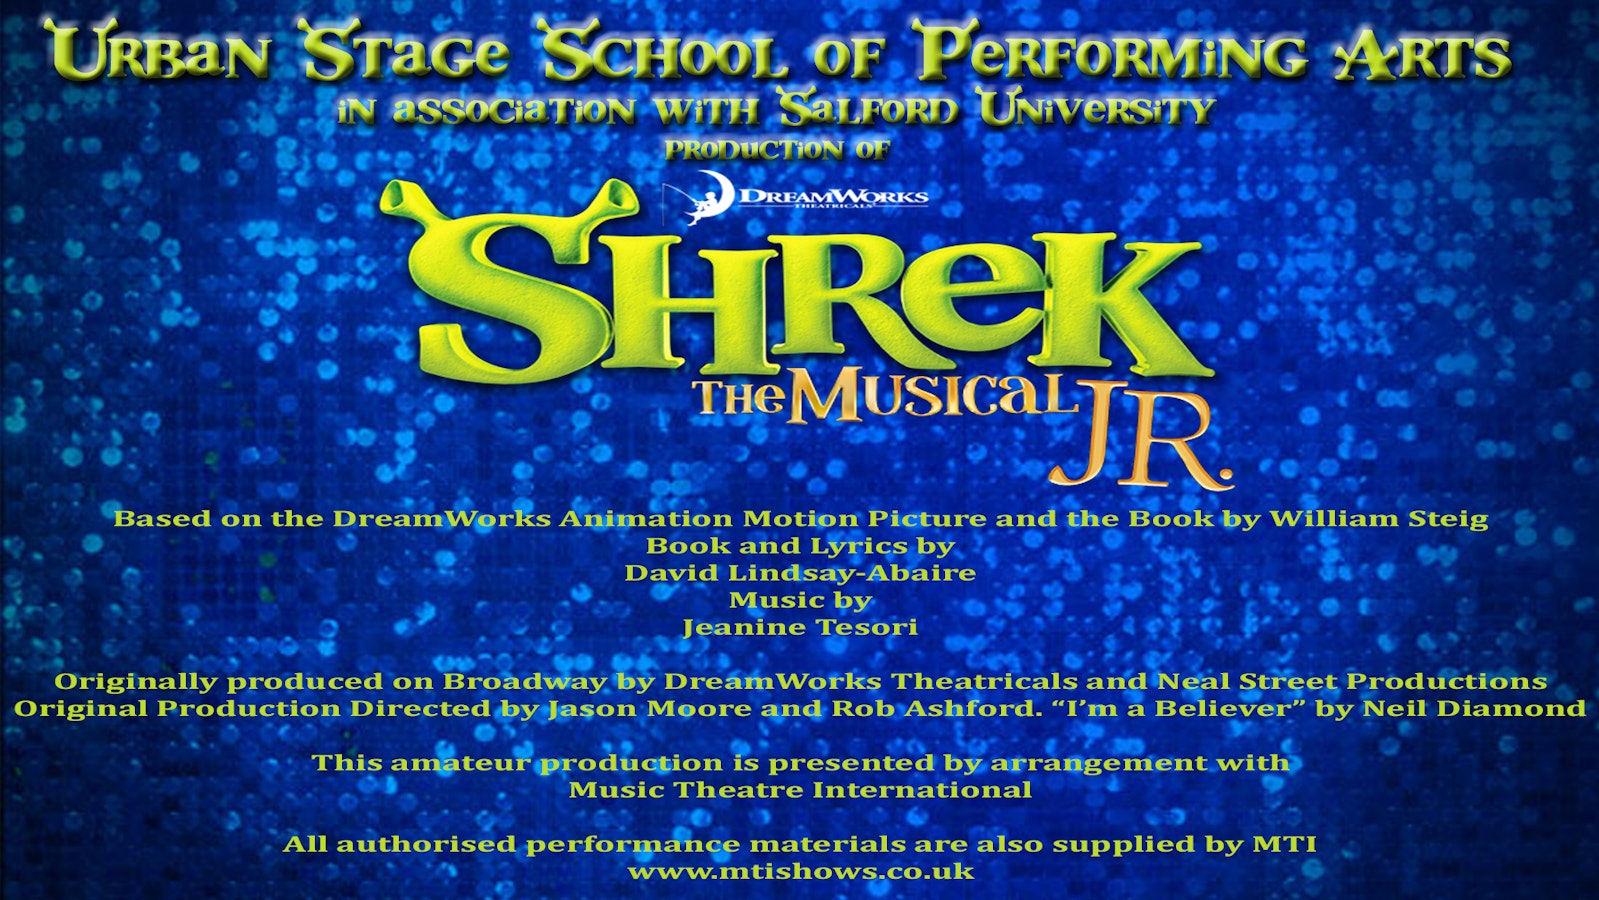 Shrek the Musical by Urban Stage